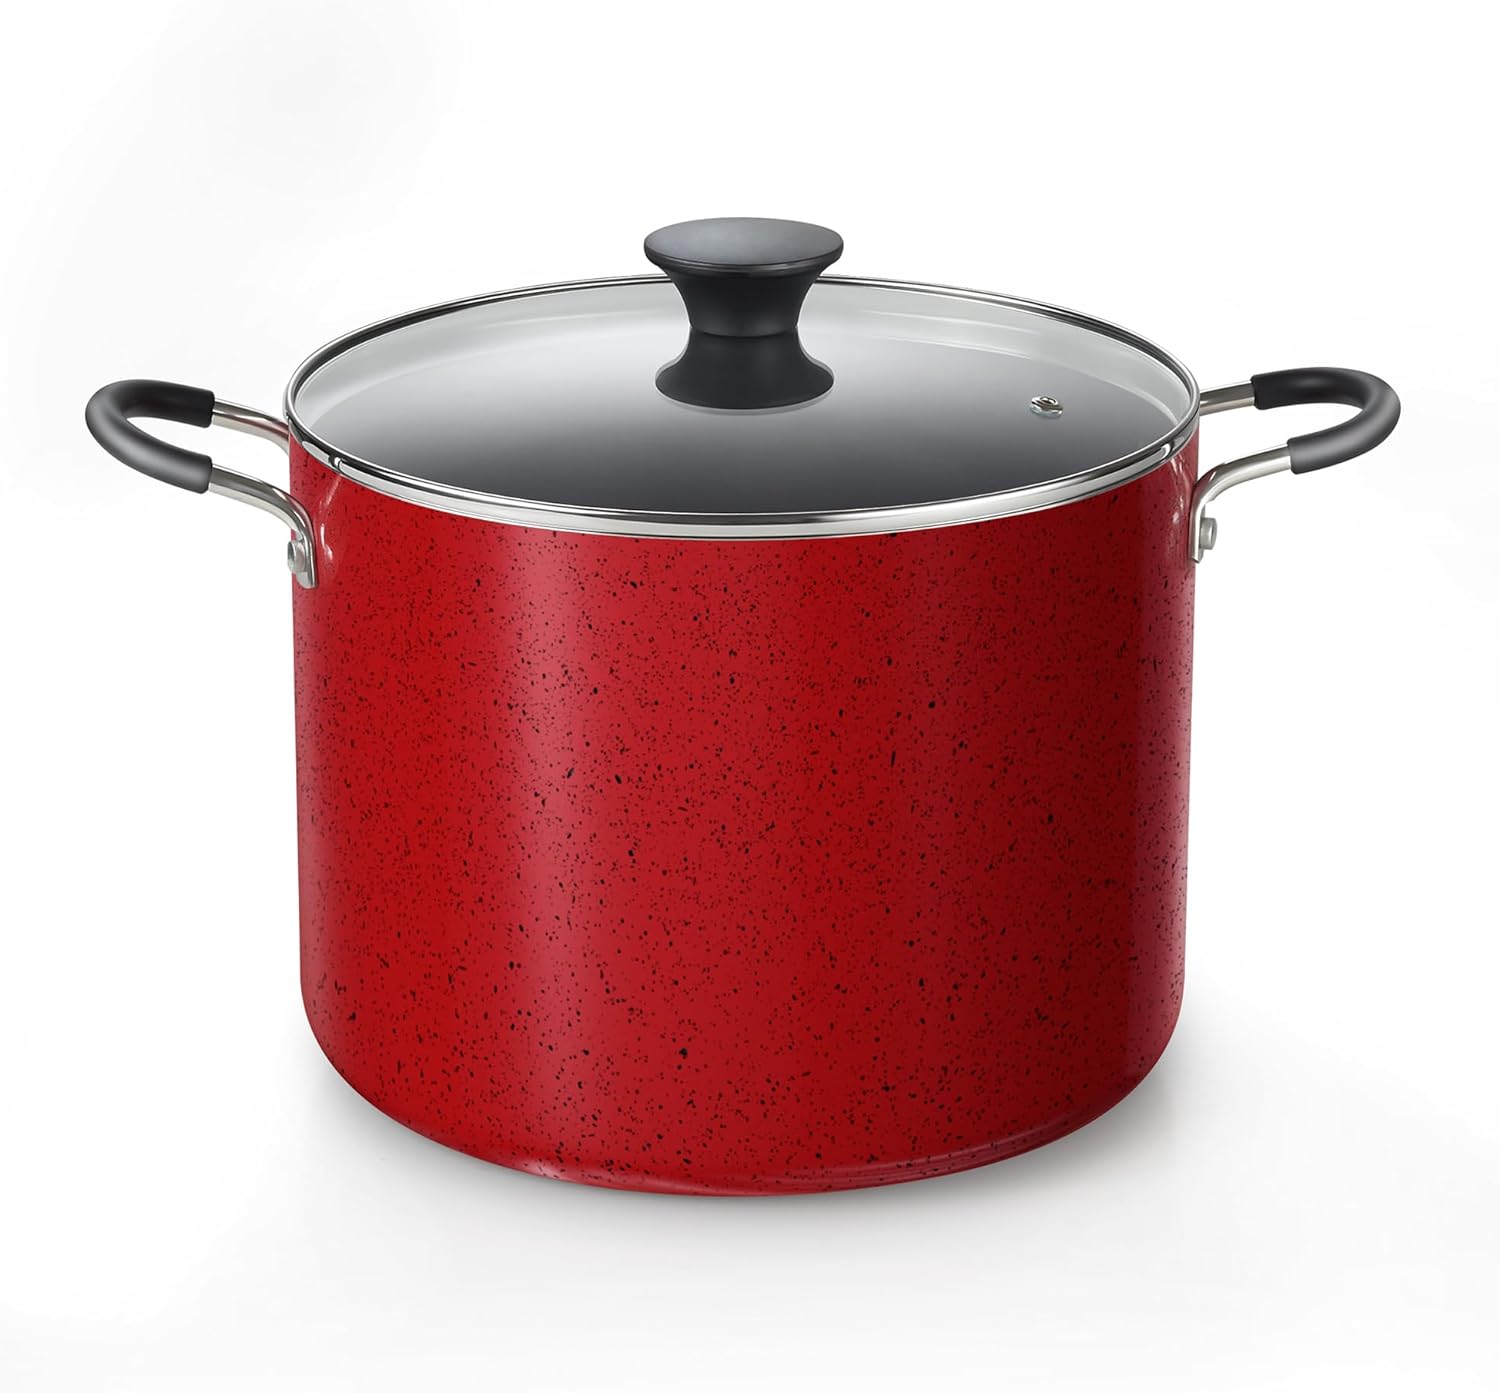 https://bigbigmart.com/wp-content/uploads/2023/11/Cook-N-Home-Nonstick-Stockpot-with-Lid-10.5-QT-Professional-Deep-Cooking-Pot-Canning-Cookware-Stock-Pot-with-Glass-Lid-Marble-Red.jpg